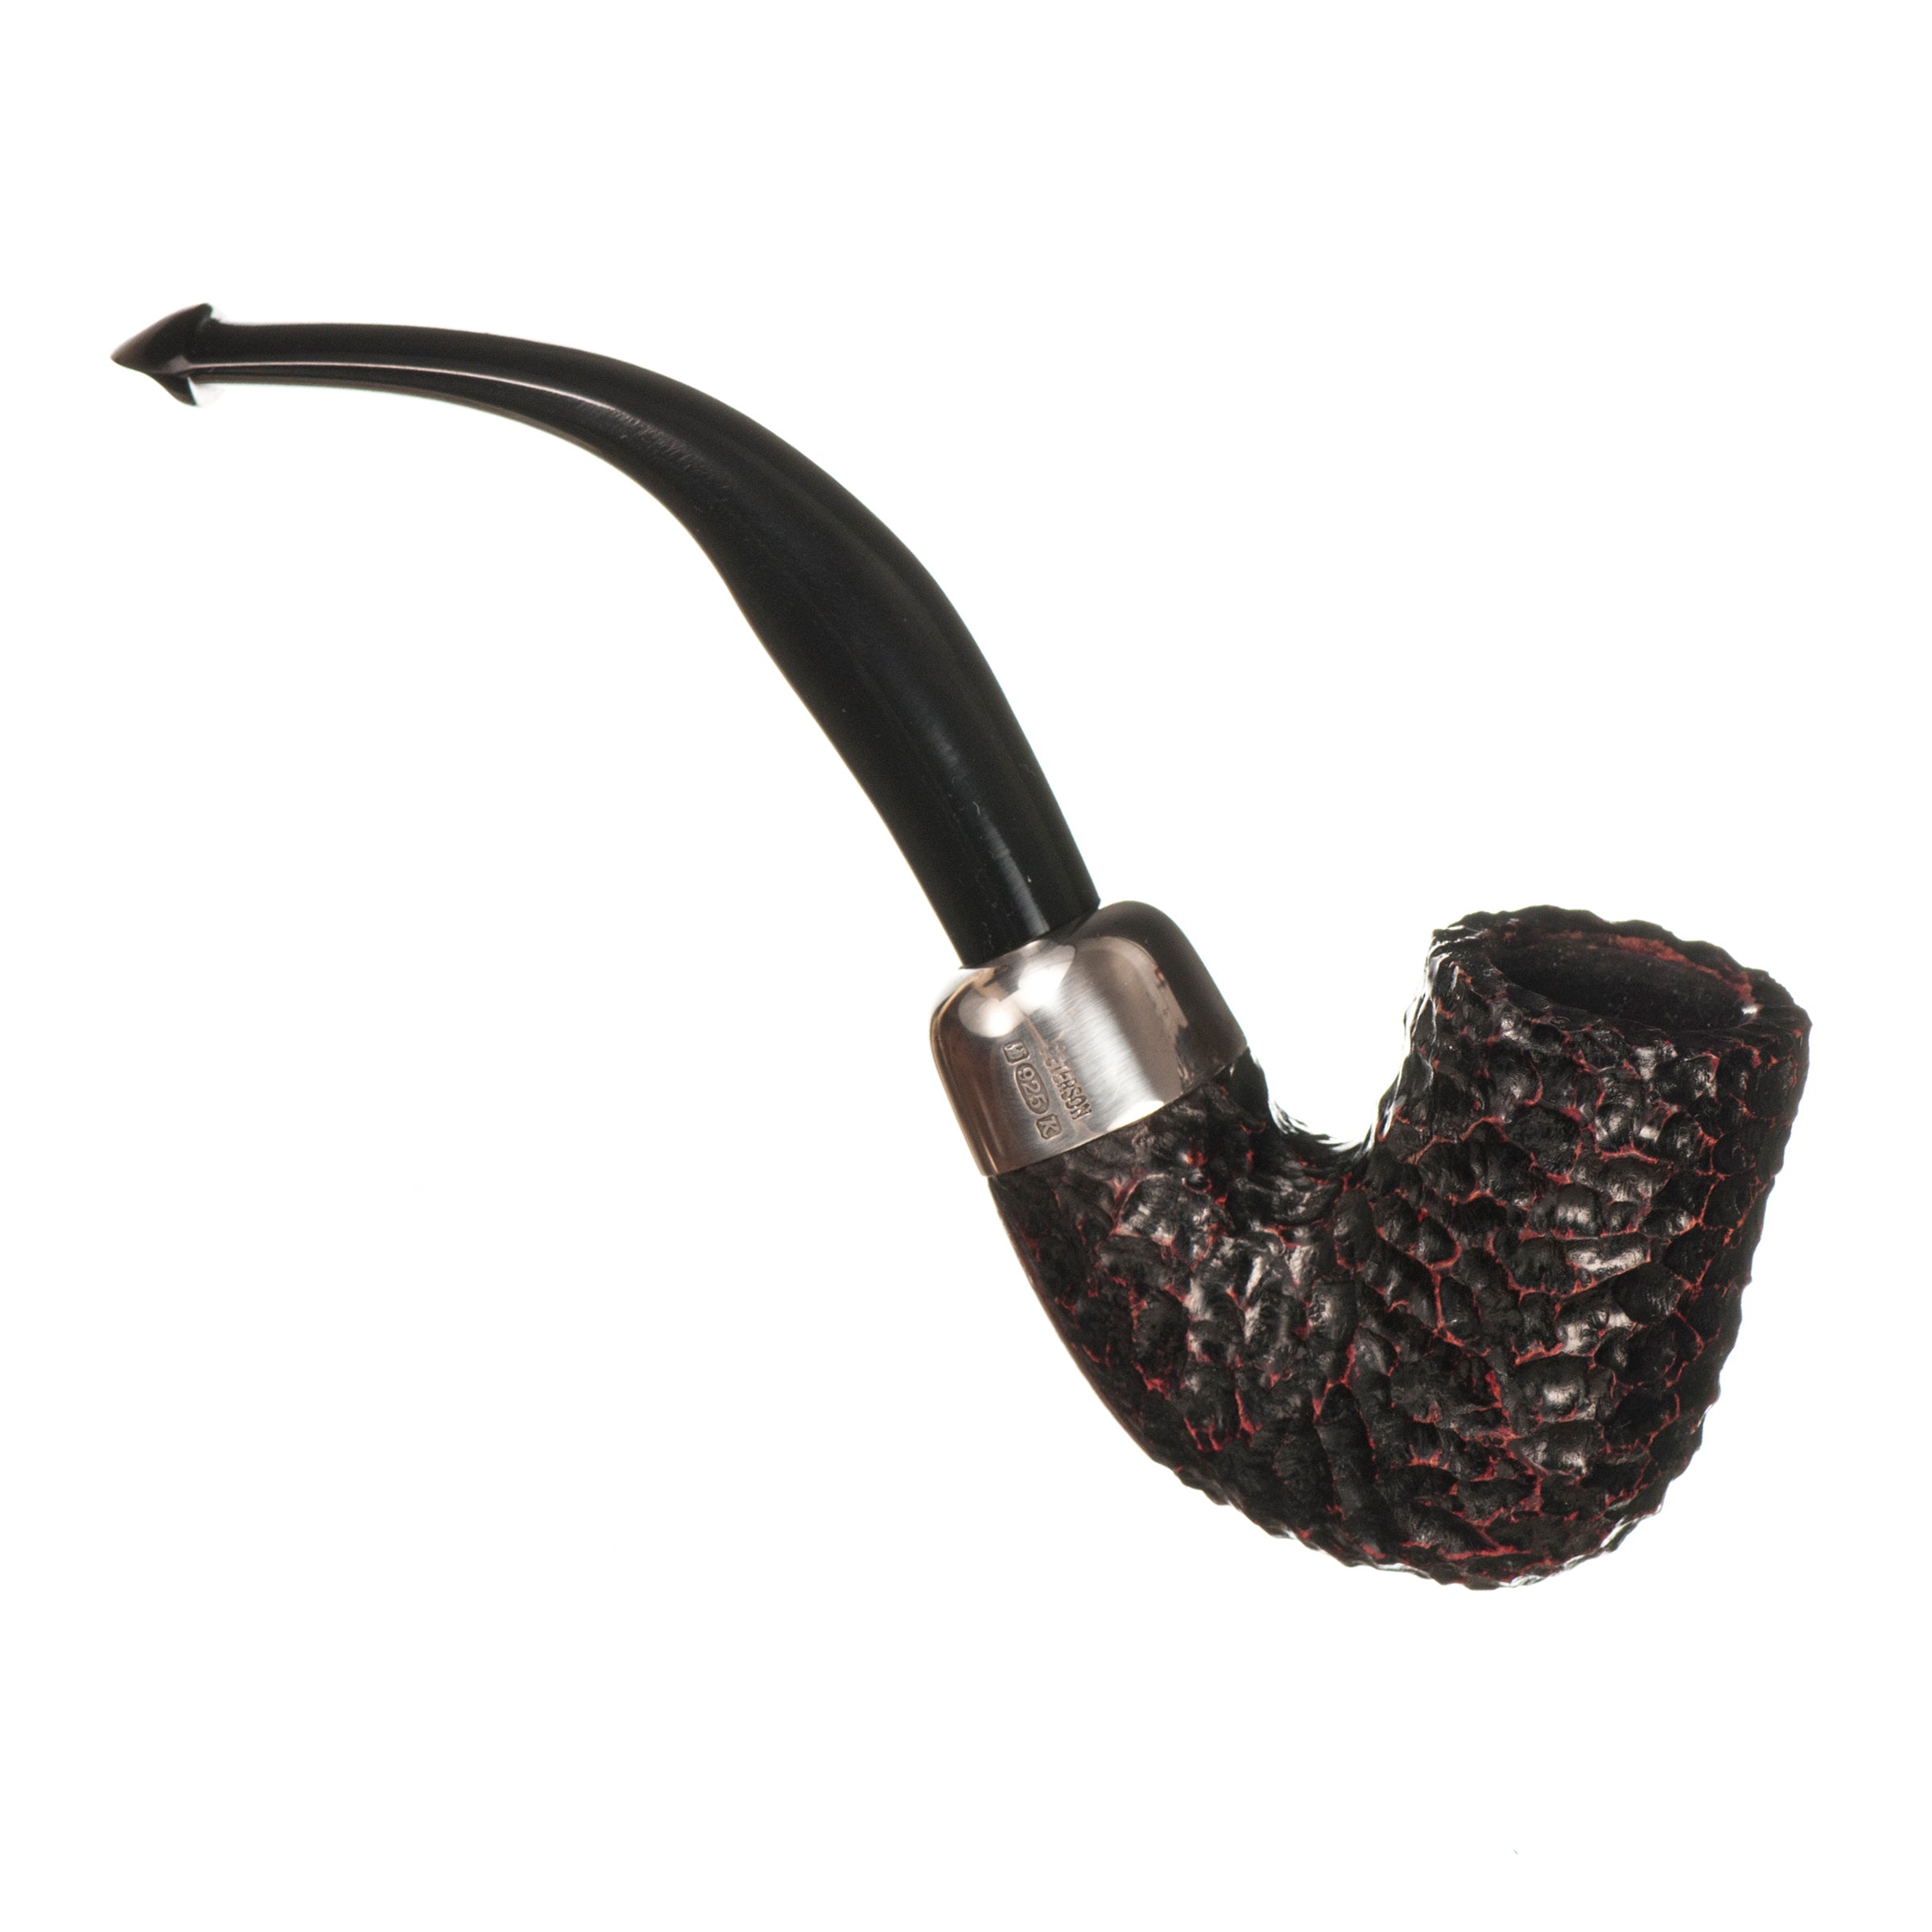 Peterson Pipe of the Year 2021 Rustic